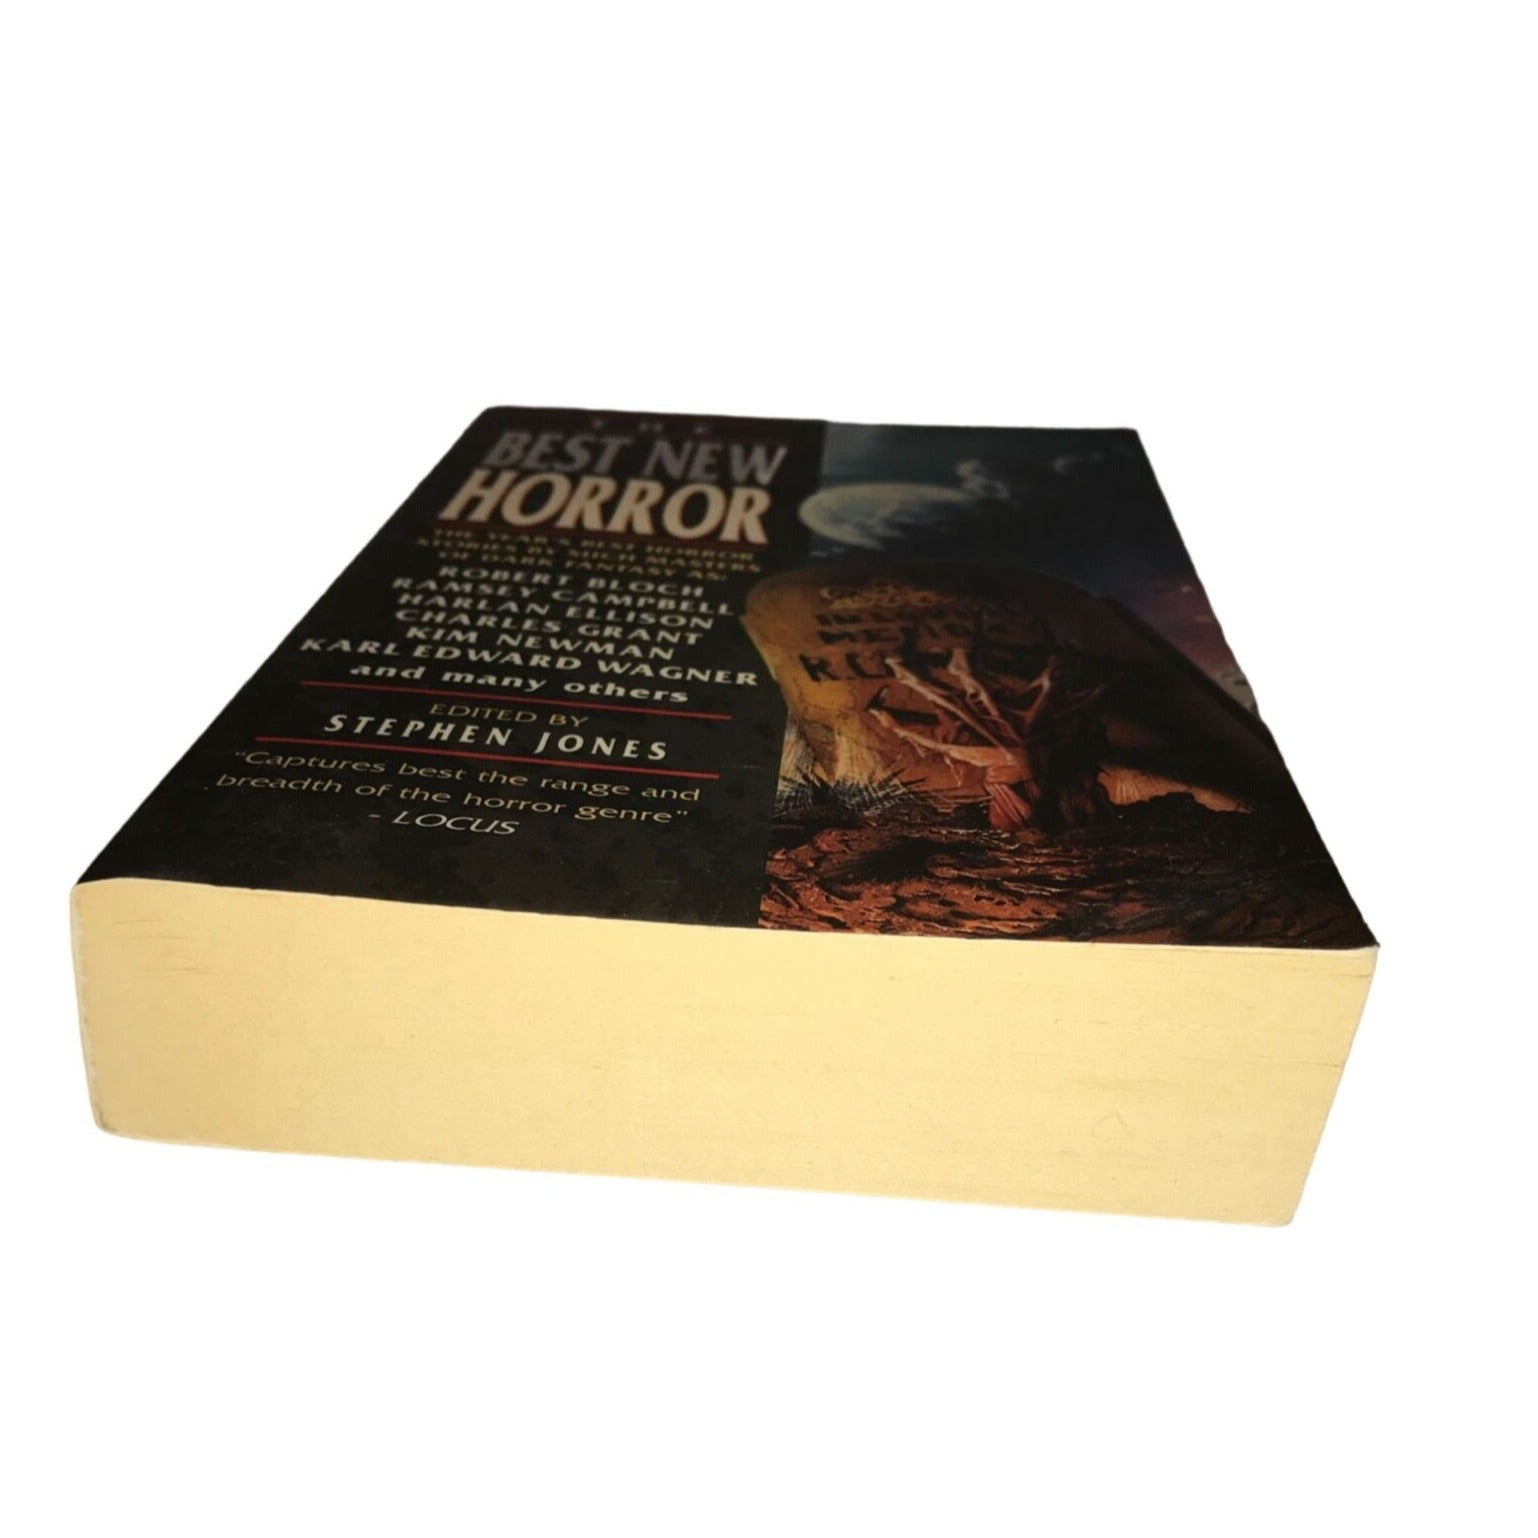 The Best New Horror - Compilation of horror stories - by Stephen Jones book